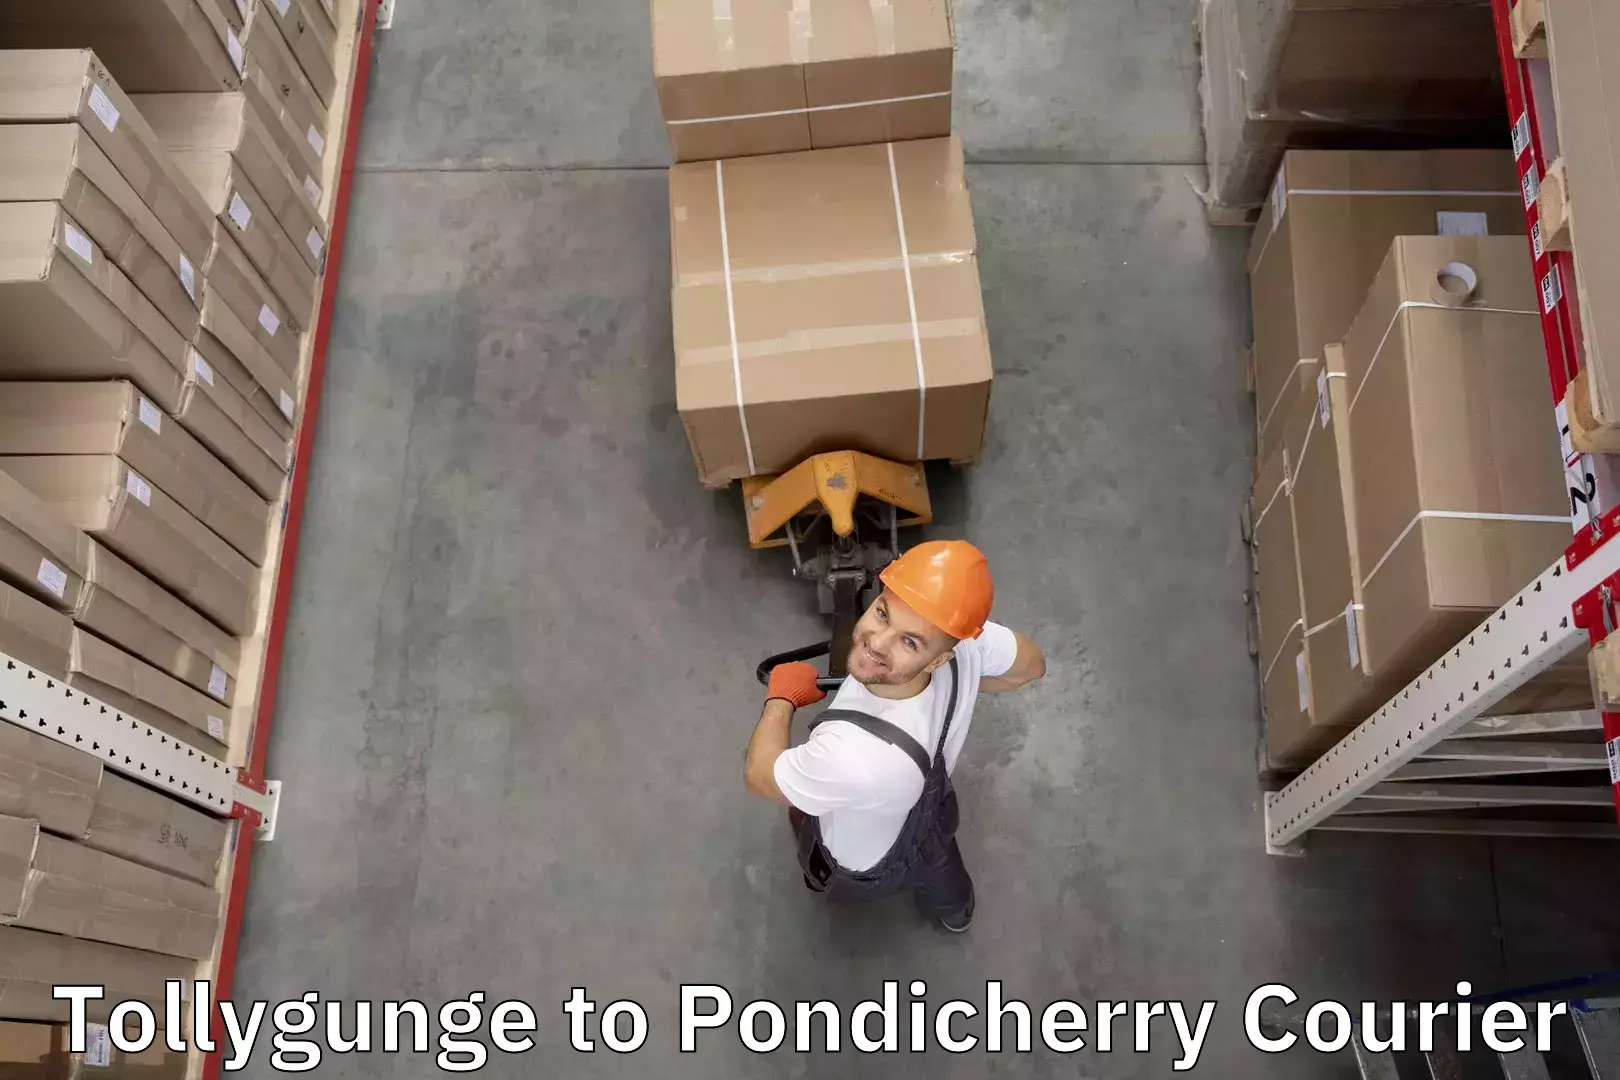 Luggage shipment specialists Tollygunge to Pondicherry